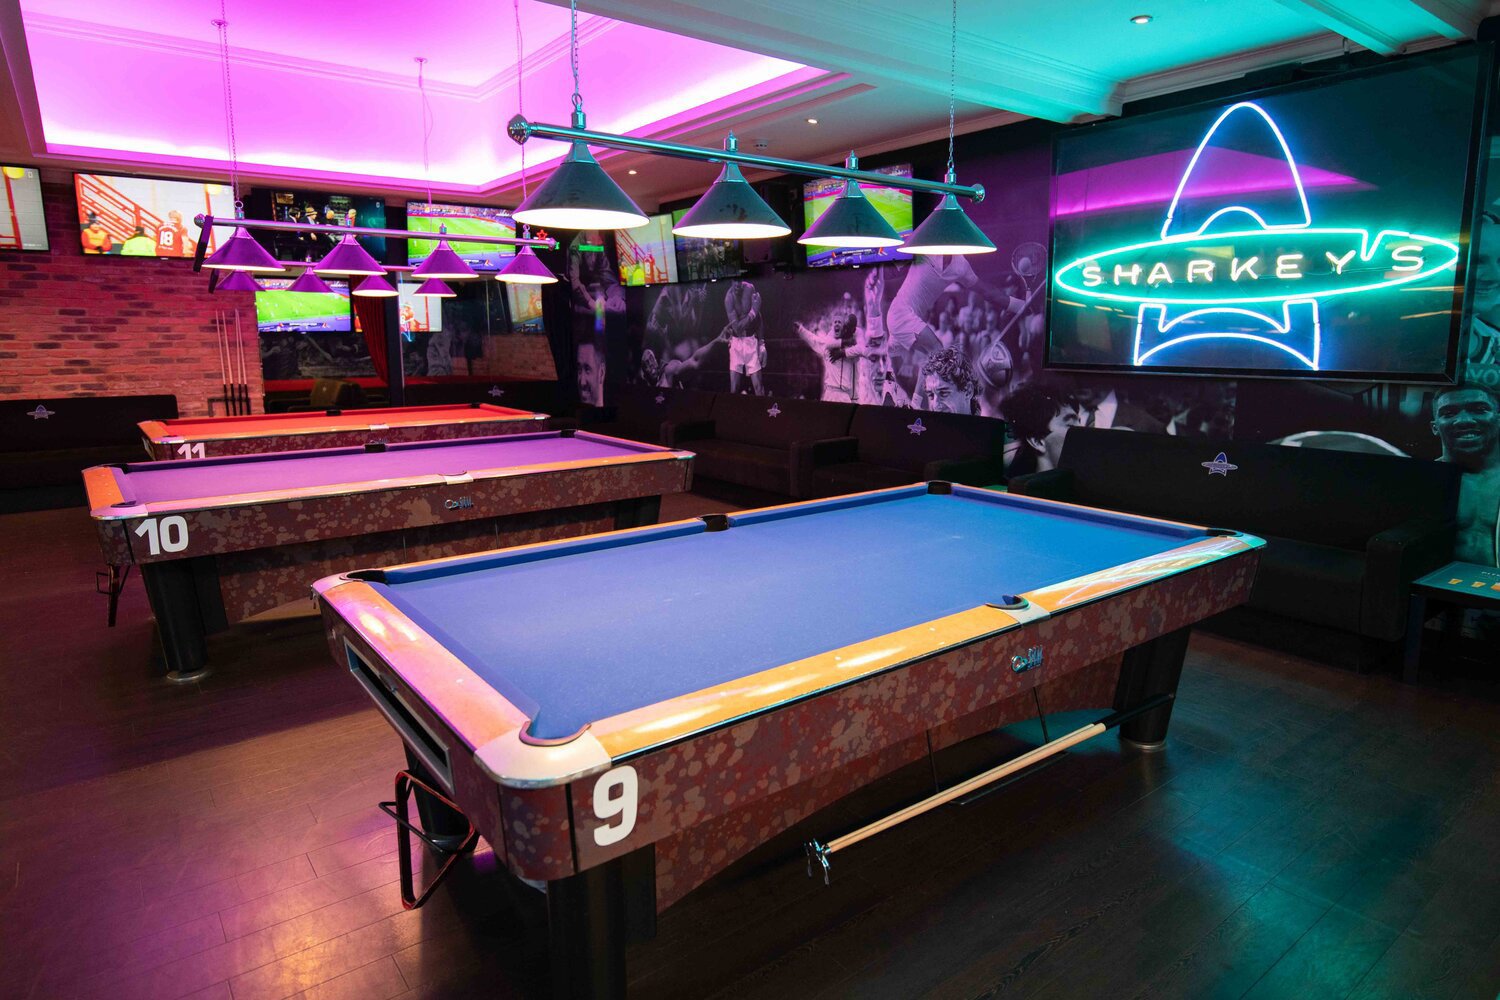 Sharkeys_Sports_Bar_Bournemouth_Live_Sports_Poole_Snooker_Table_Tennis_VIP_Rooms_Consoles-11.jpg